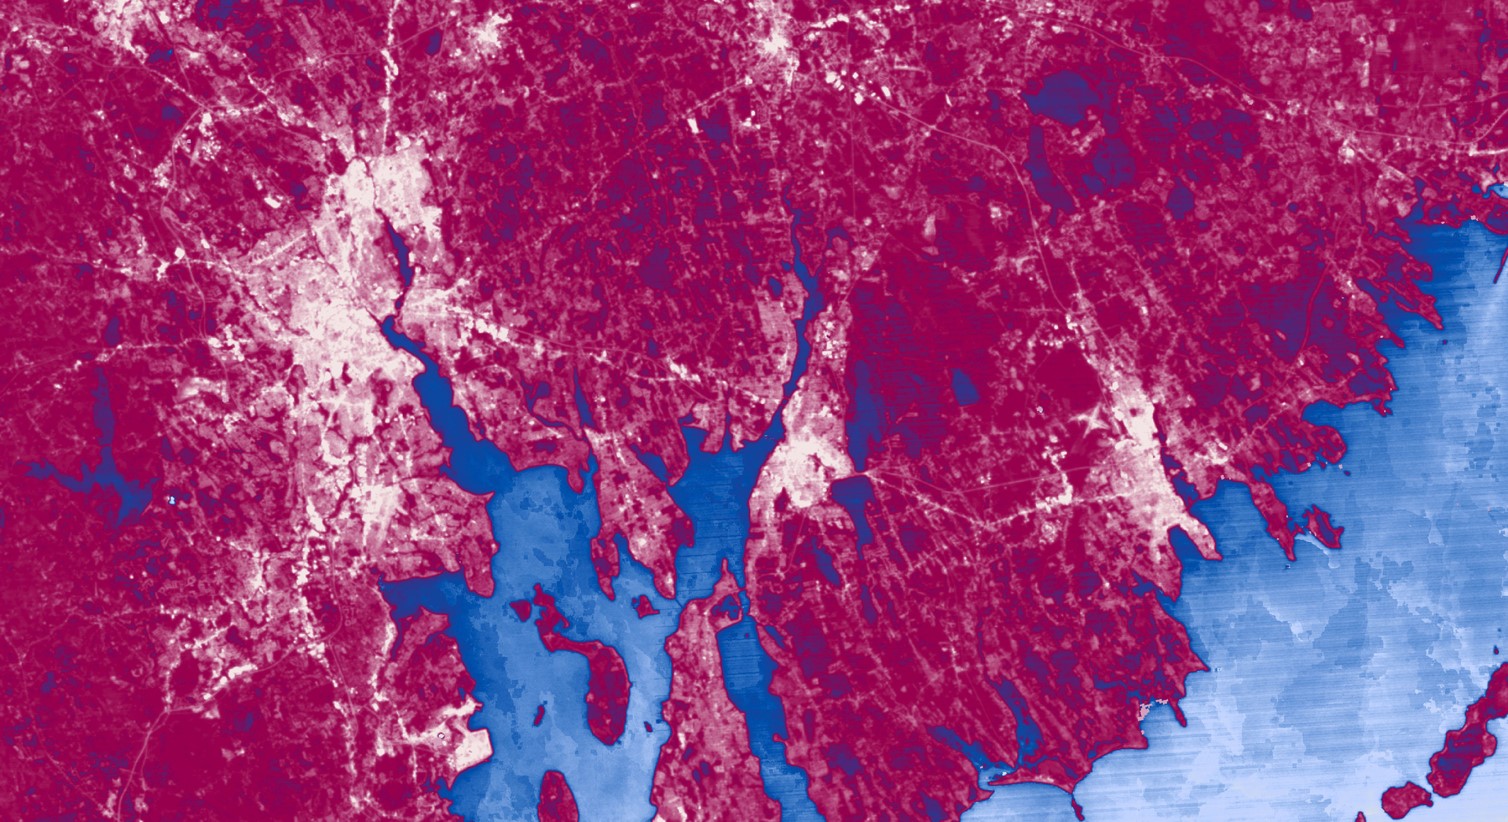 Land surface temperature averages for 2014 through 2018 derived using the new Landsat Level-2 Provisional Surface Temperature product (Landsat 7 ETM+ and Landsat 8 OLI). This image is focused on Providence, RI, and was used to assess urban heat within the city. Higher surface temperatures appear lighter pink; lower surface temperatures appear deeper pink. The blue areas represent the water surrounding the area.